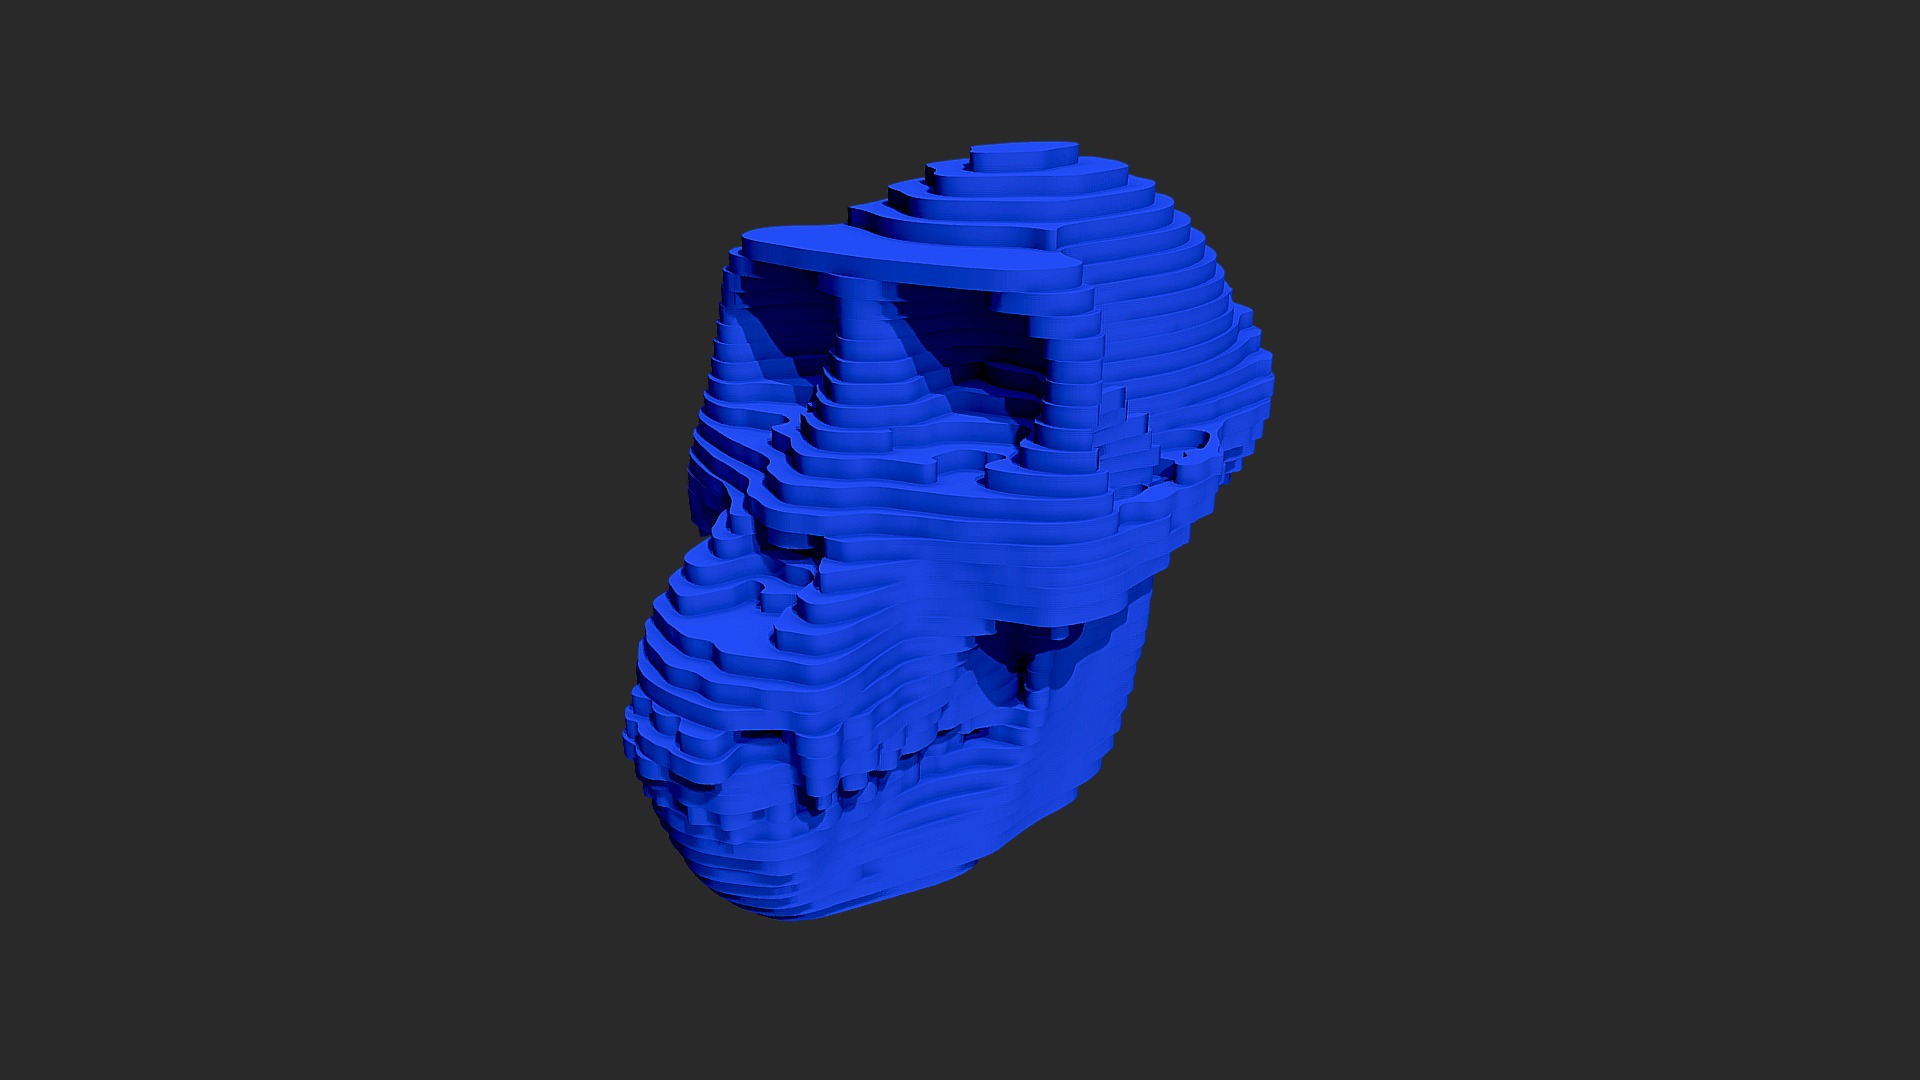 3D model Stacked Gorilla Skull - This is a 3D model of the Stacked Gorilla Skull. The 3D model is about a blue and white sphere.